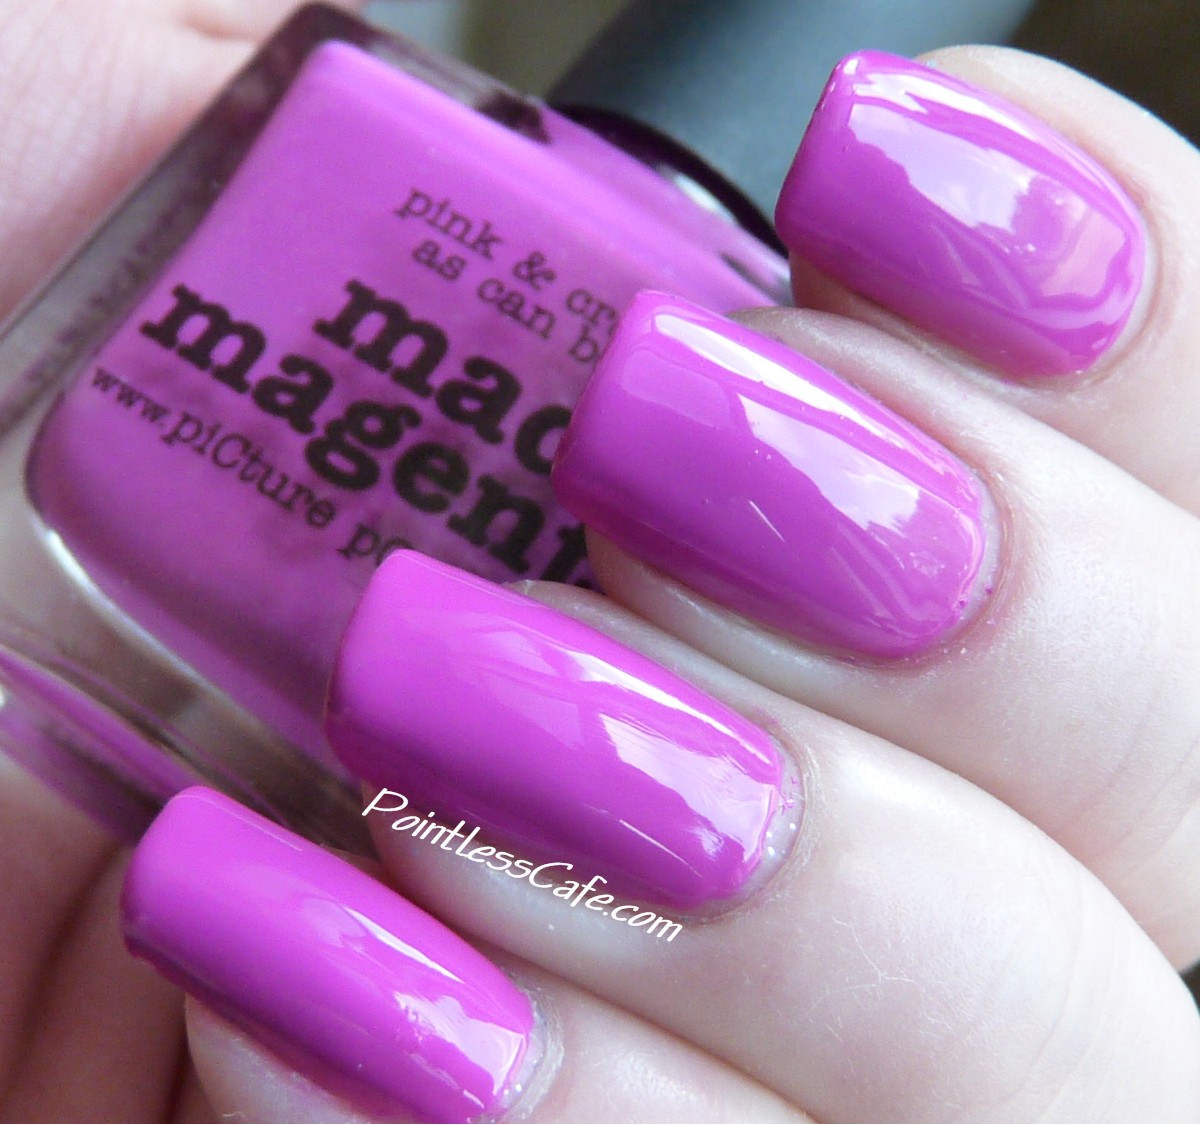 piCture pOlish Mad Magenta with Nail Art | Pointless Cafe